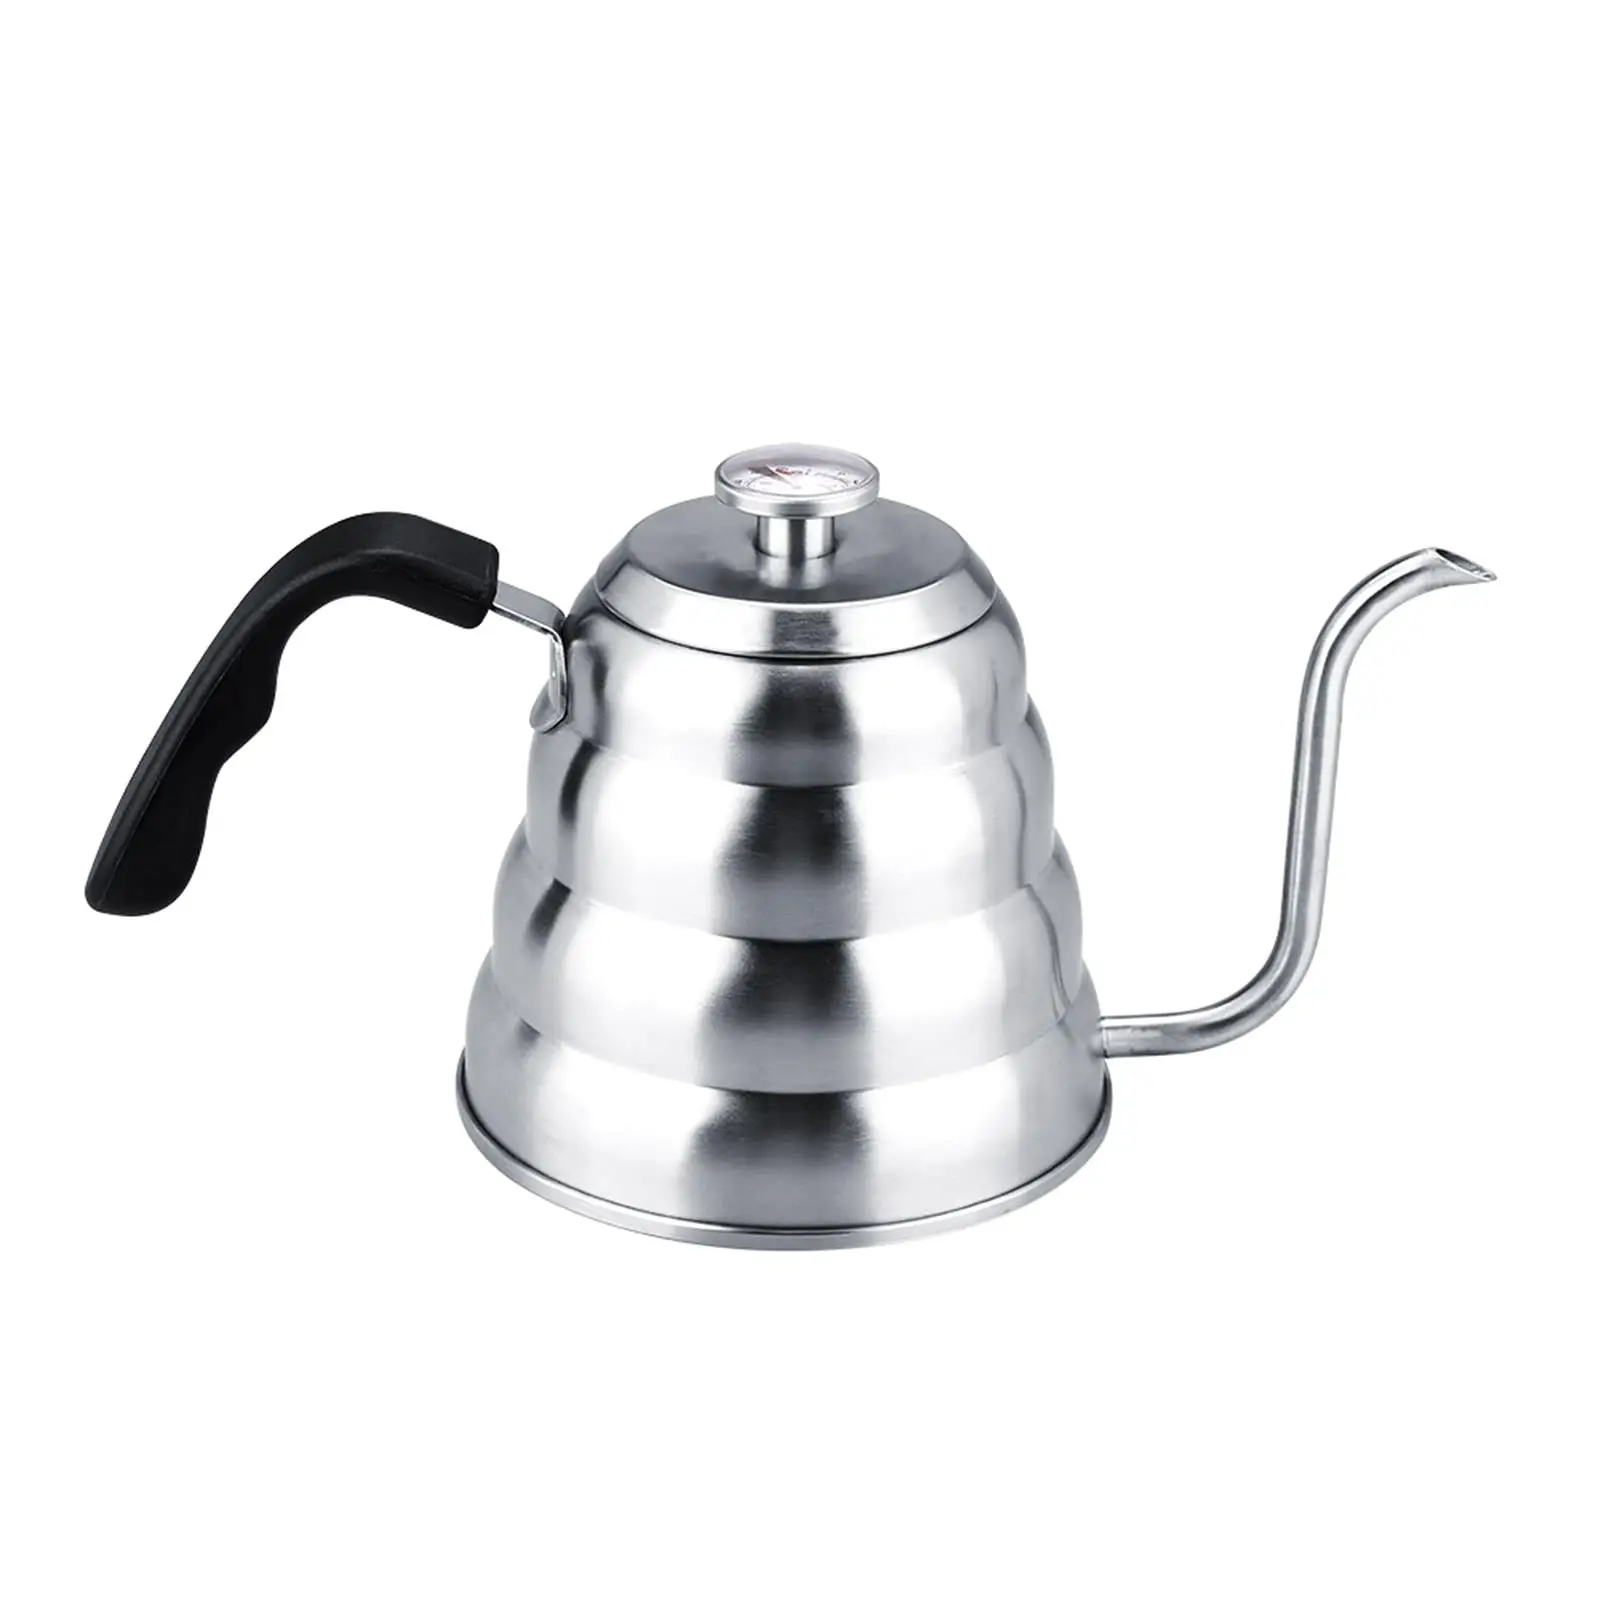 

Stainless Steel Gooseneck Coffee Kettle with Thermometer - 1.2L Thermos Pour Over Teapot